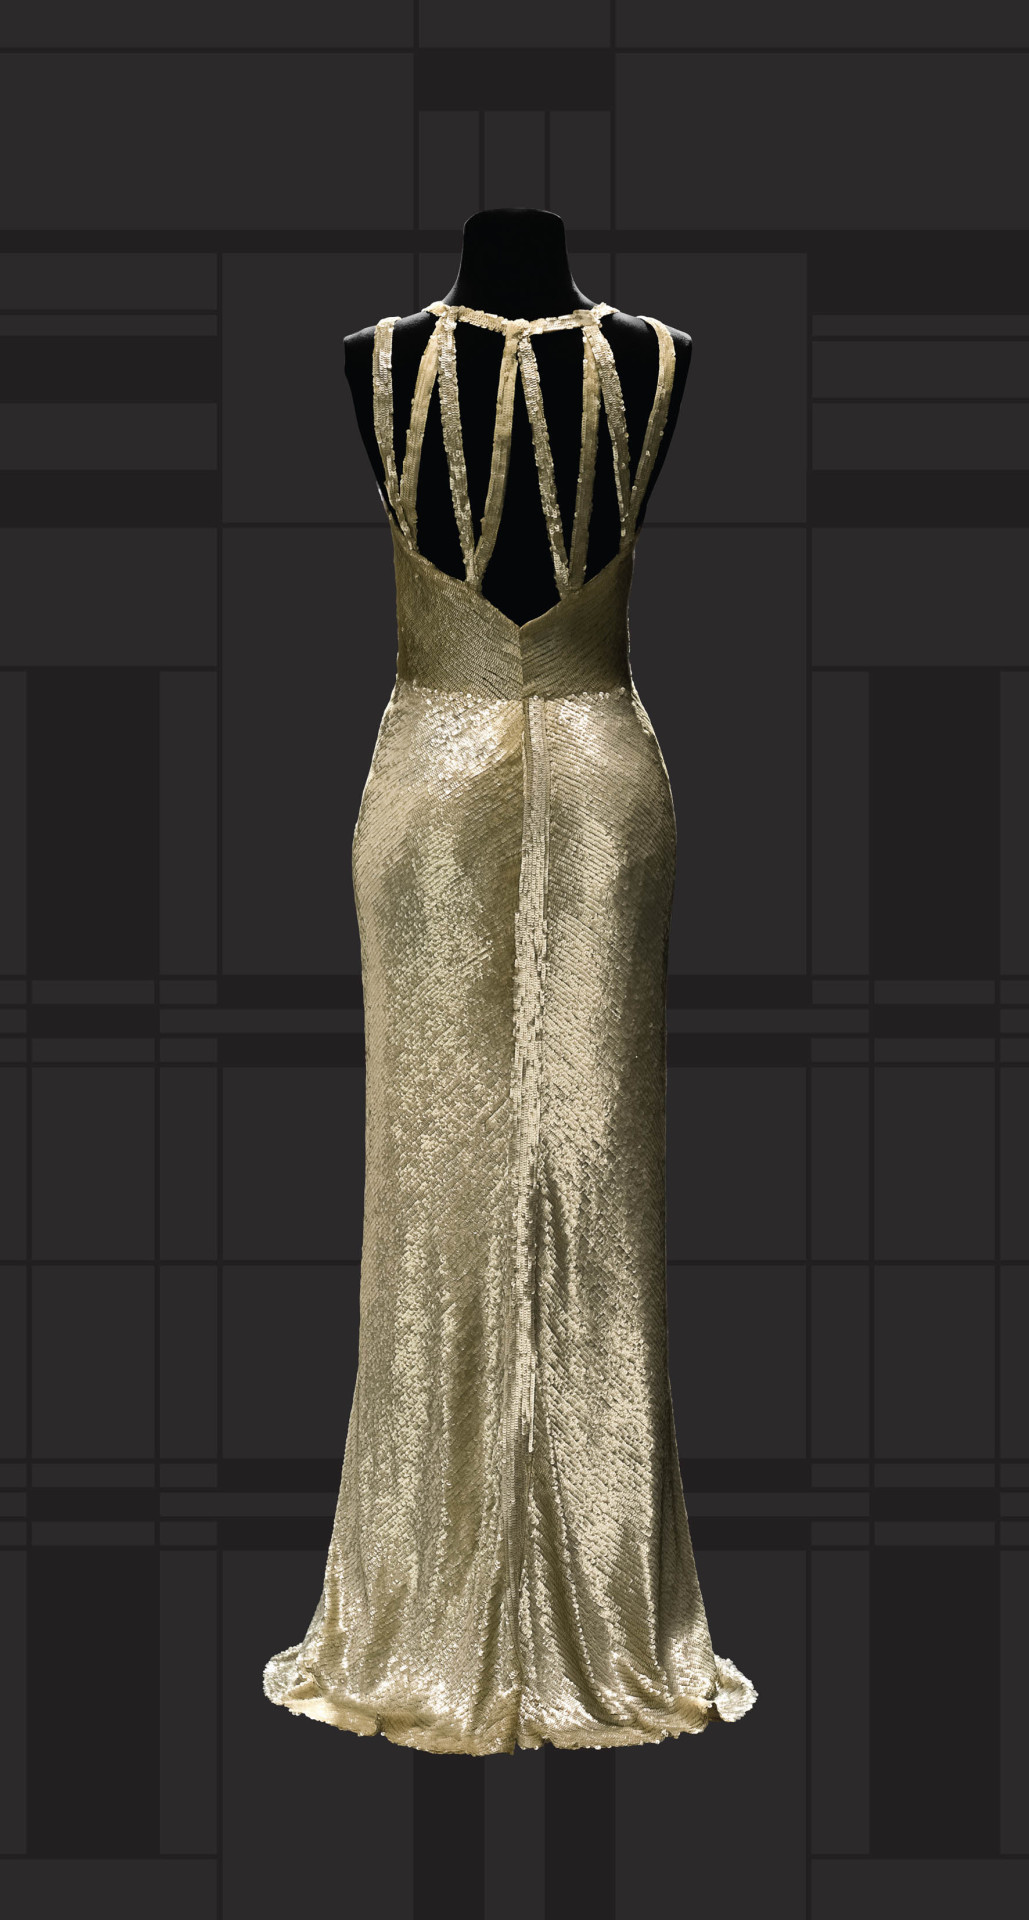 historicalfashion — Chanel evening dress | Museum of Costume and...